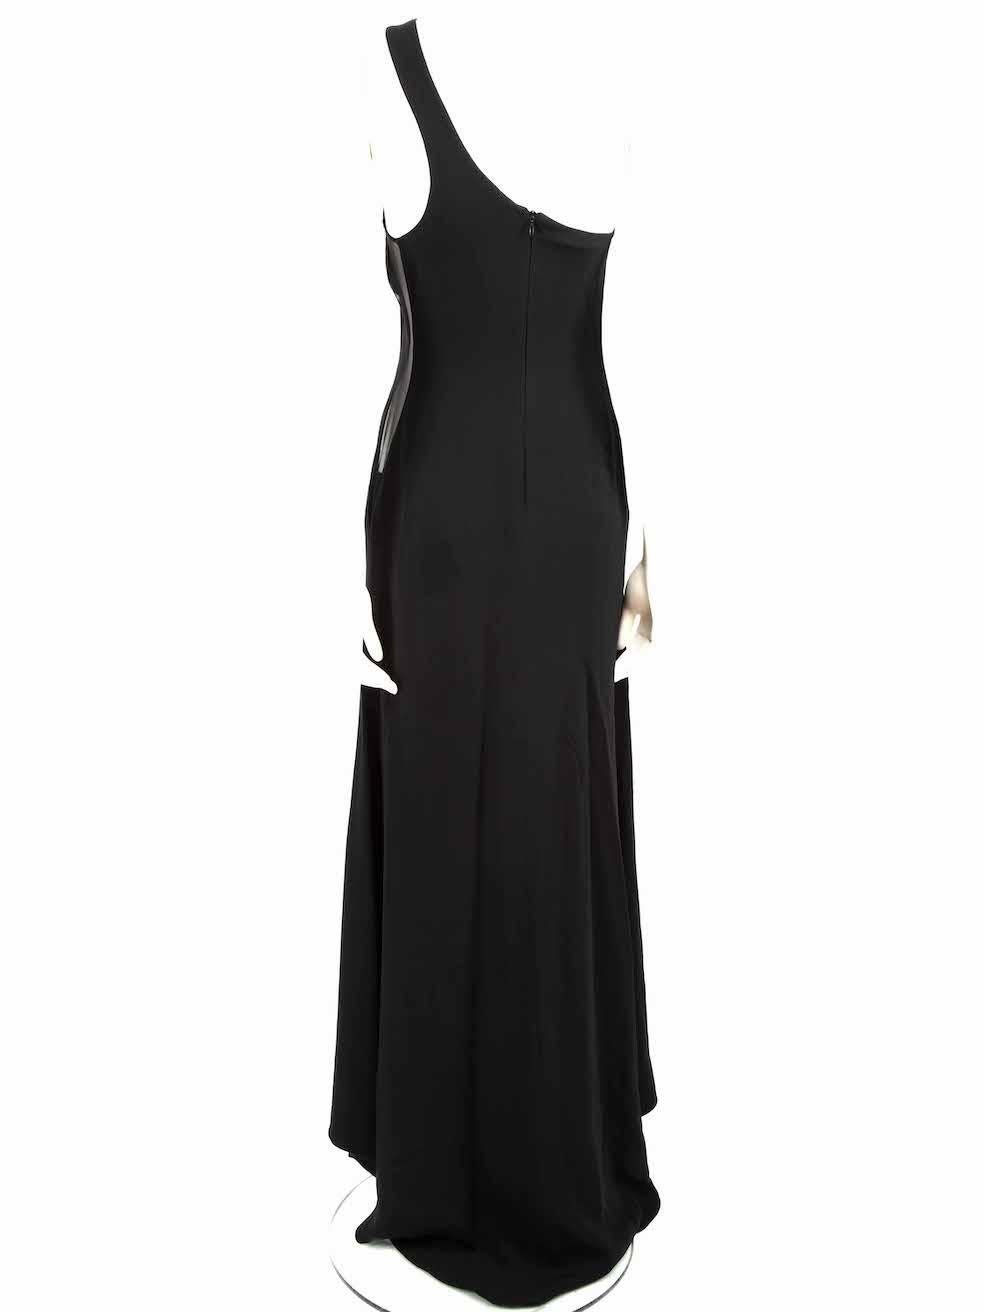 Stella McCartney Black One-Shoulder Maxi Dress Size XS In Good Condition For Sale In London, GB